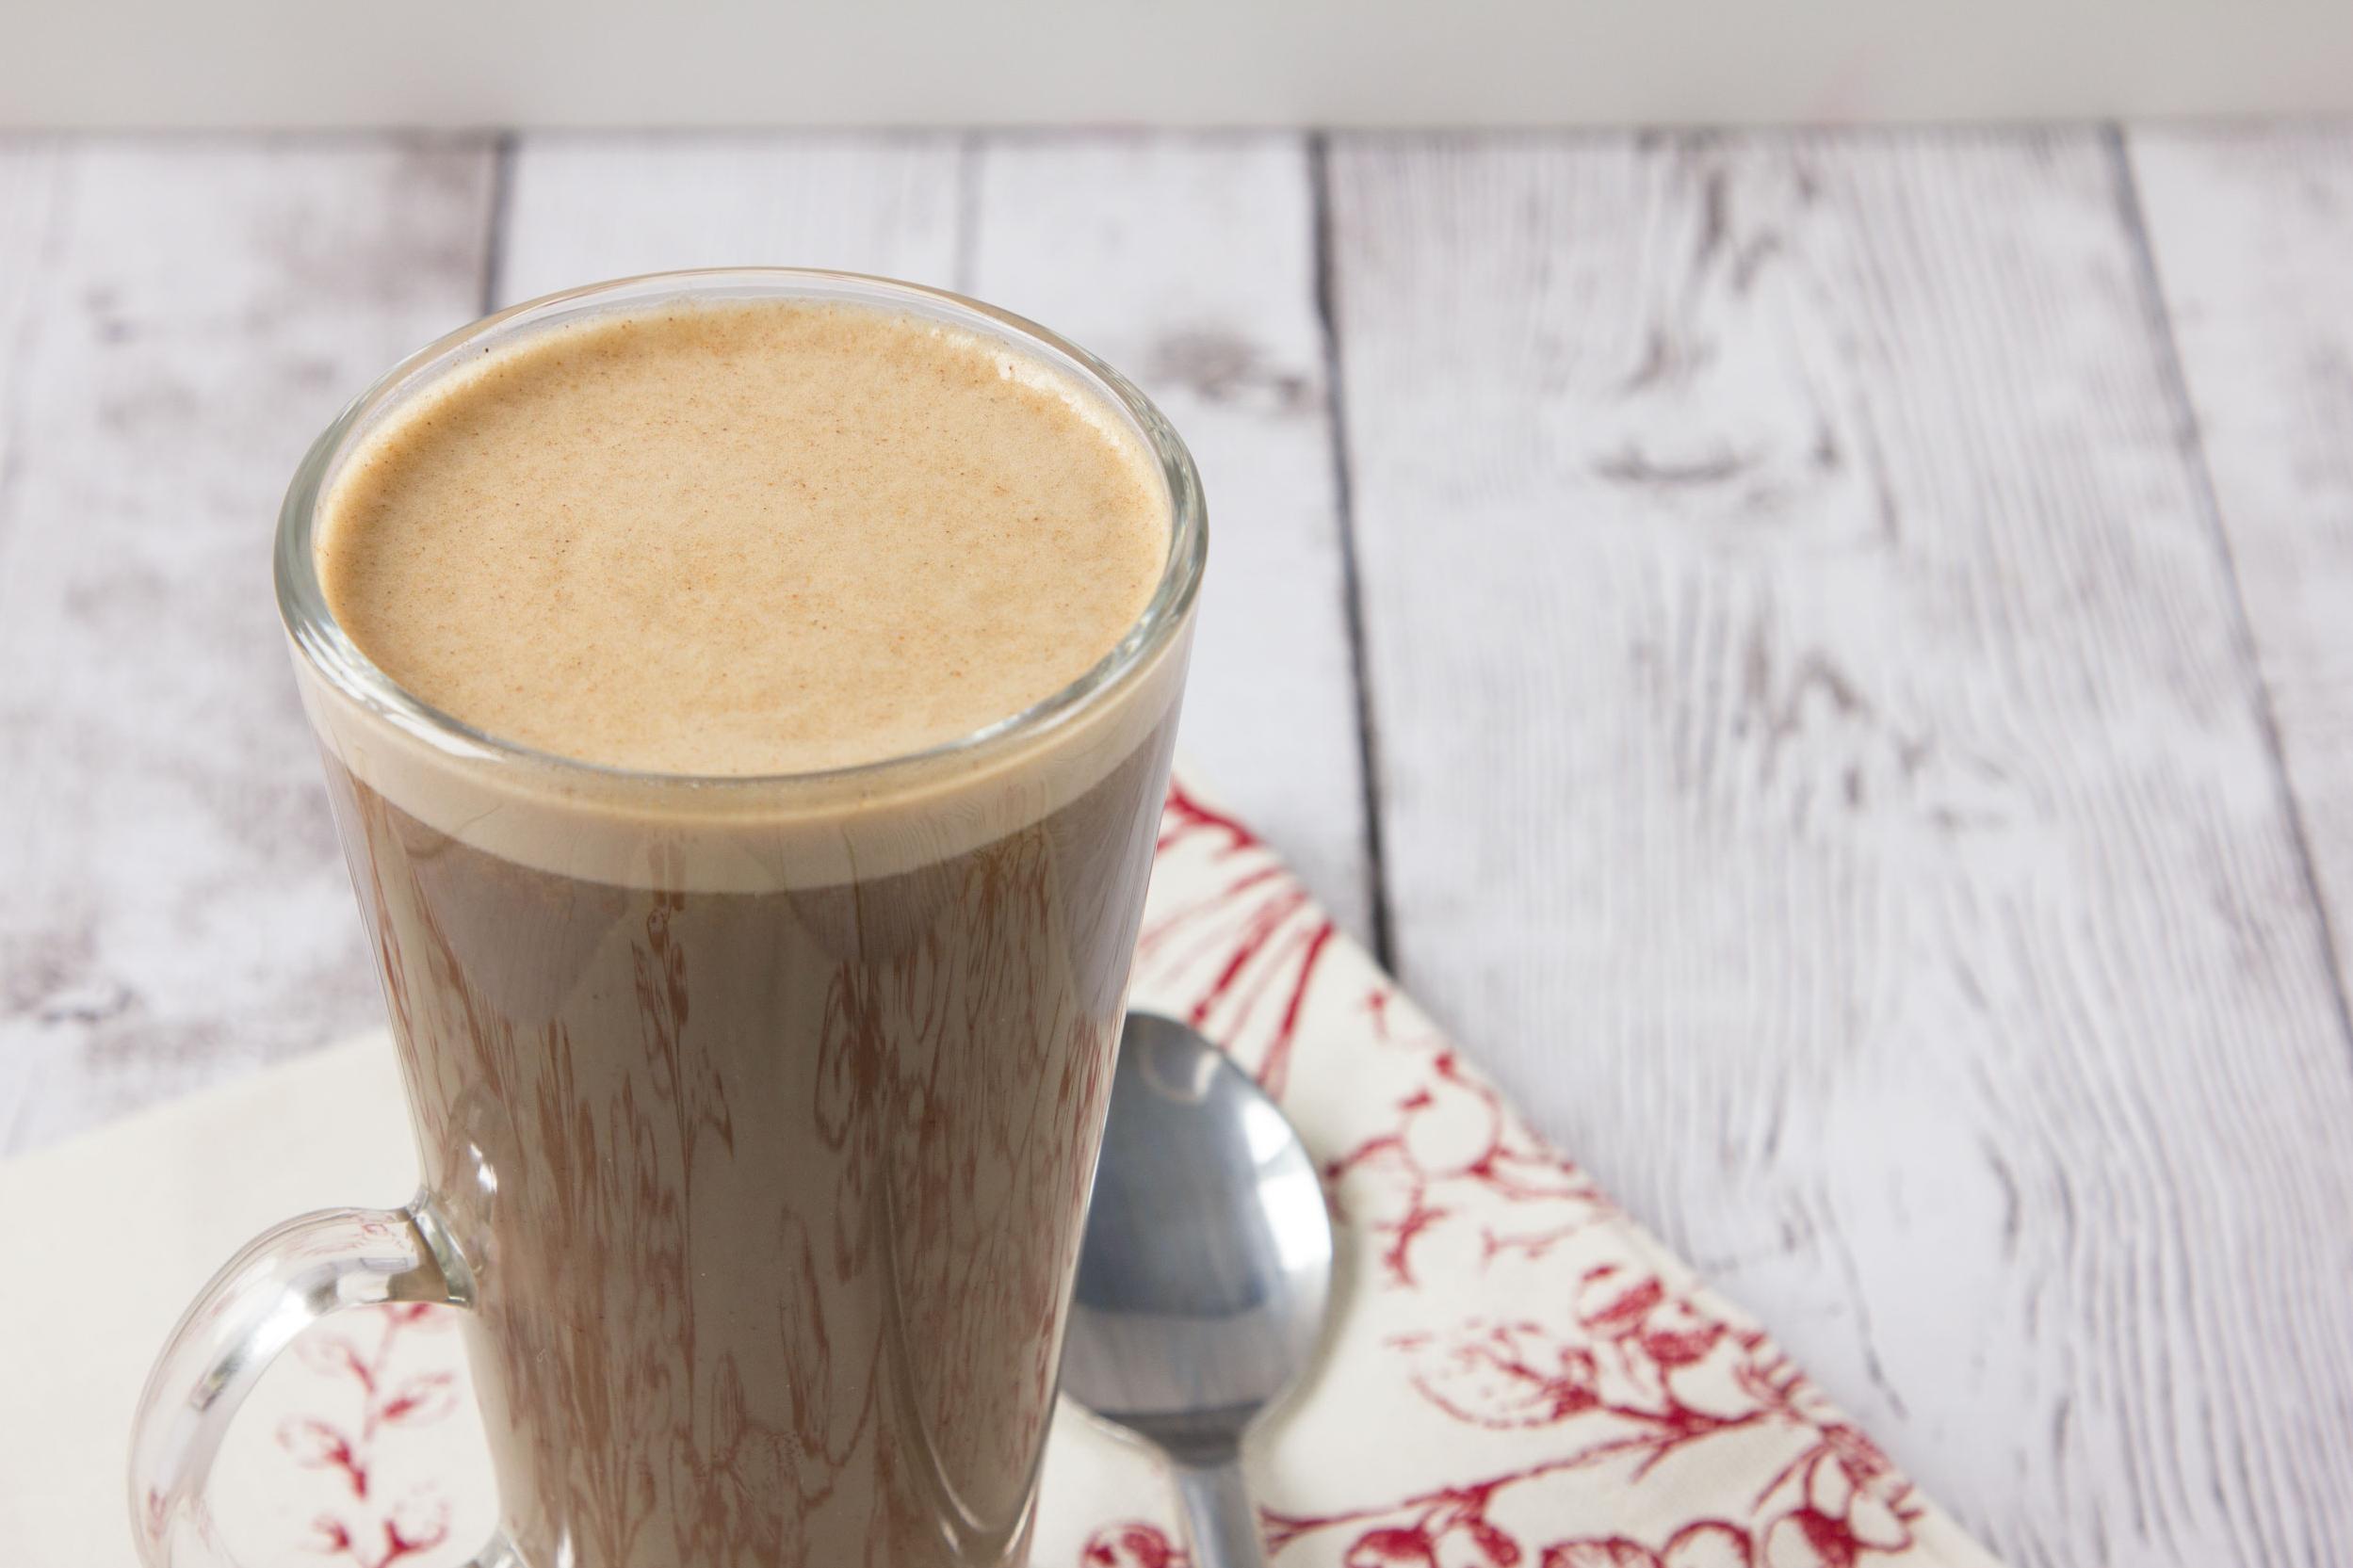  Sip on fall with a low carb pumpkin spice latte!